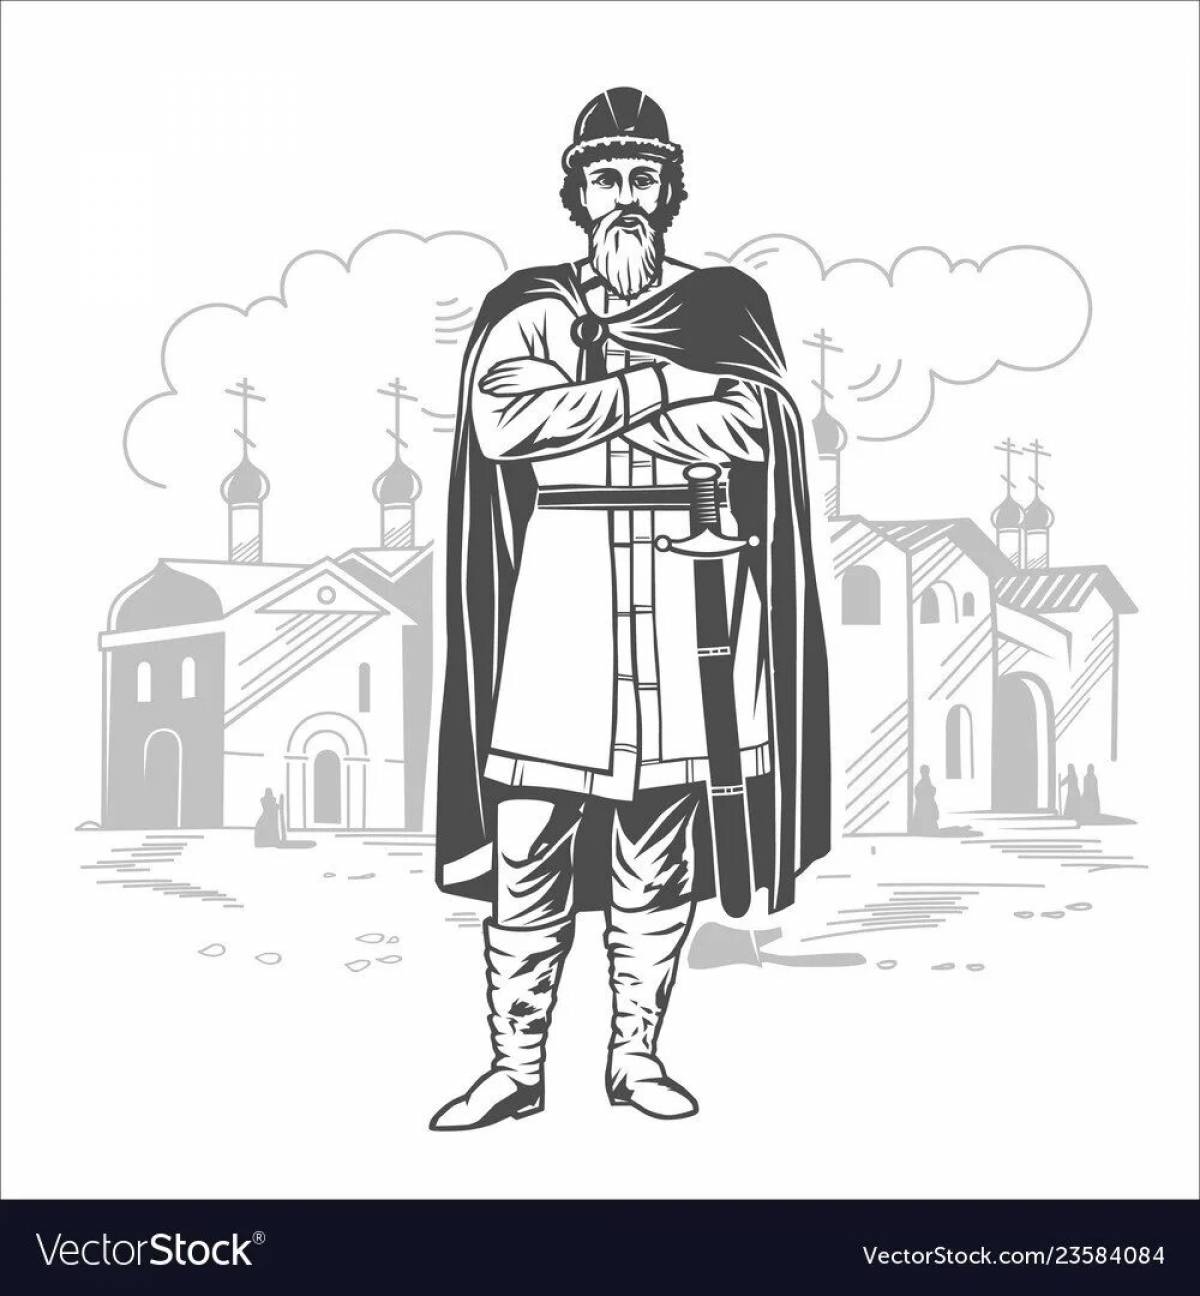 Brilliant prince vladimir red sun coloring page